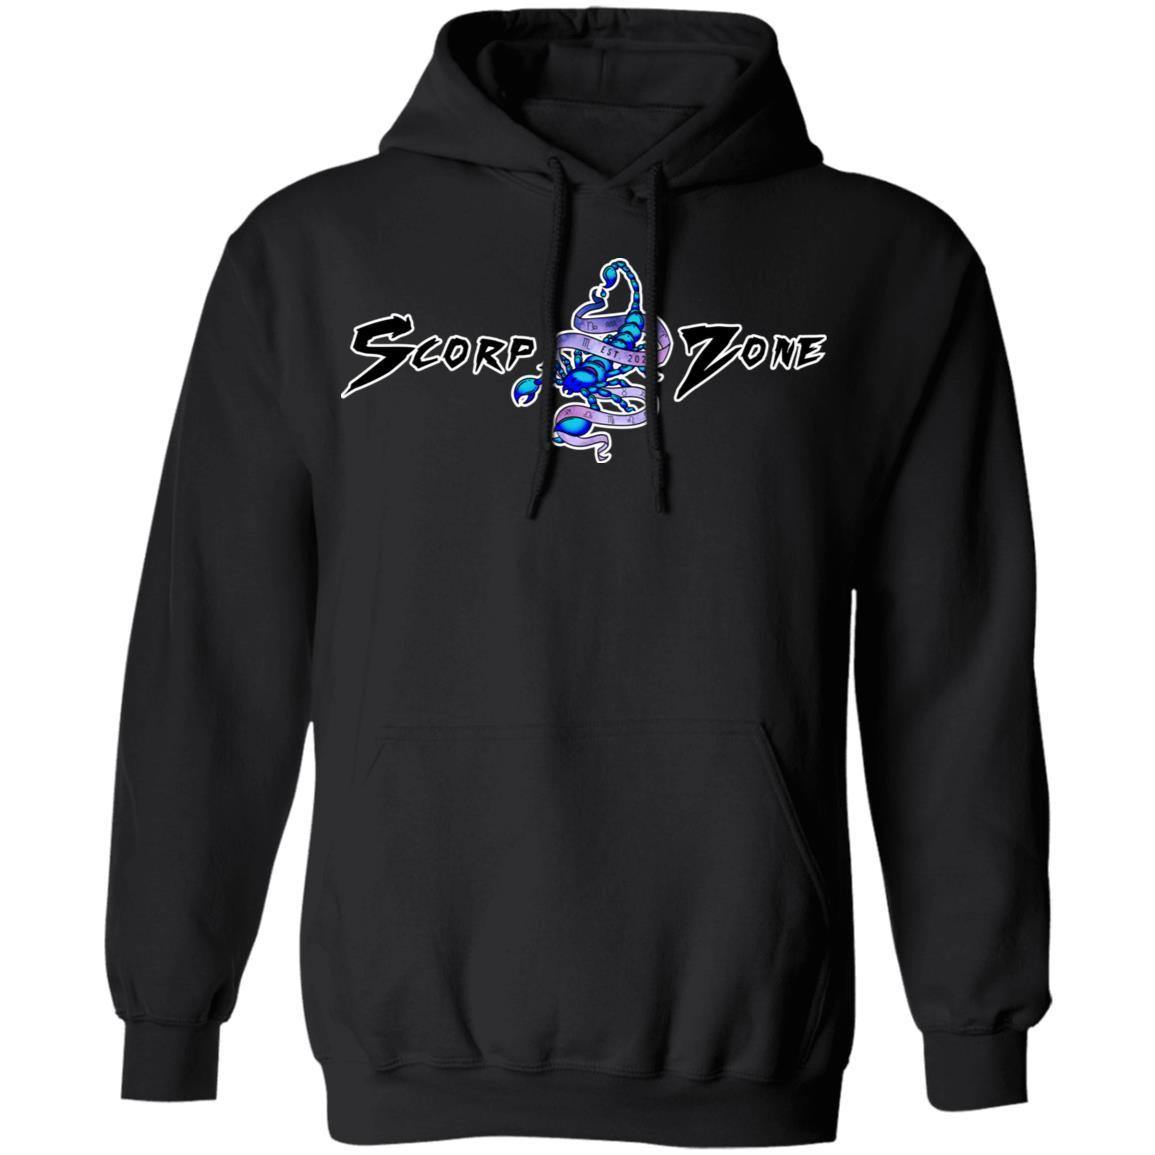 TAURUS DESIGN ON BACK AND SMALL SCORP ZONE LOGO ON FRONT - Z66 Pullover Hoodie - ScorpZone